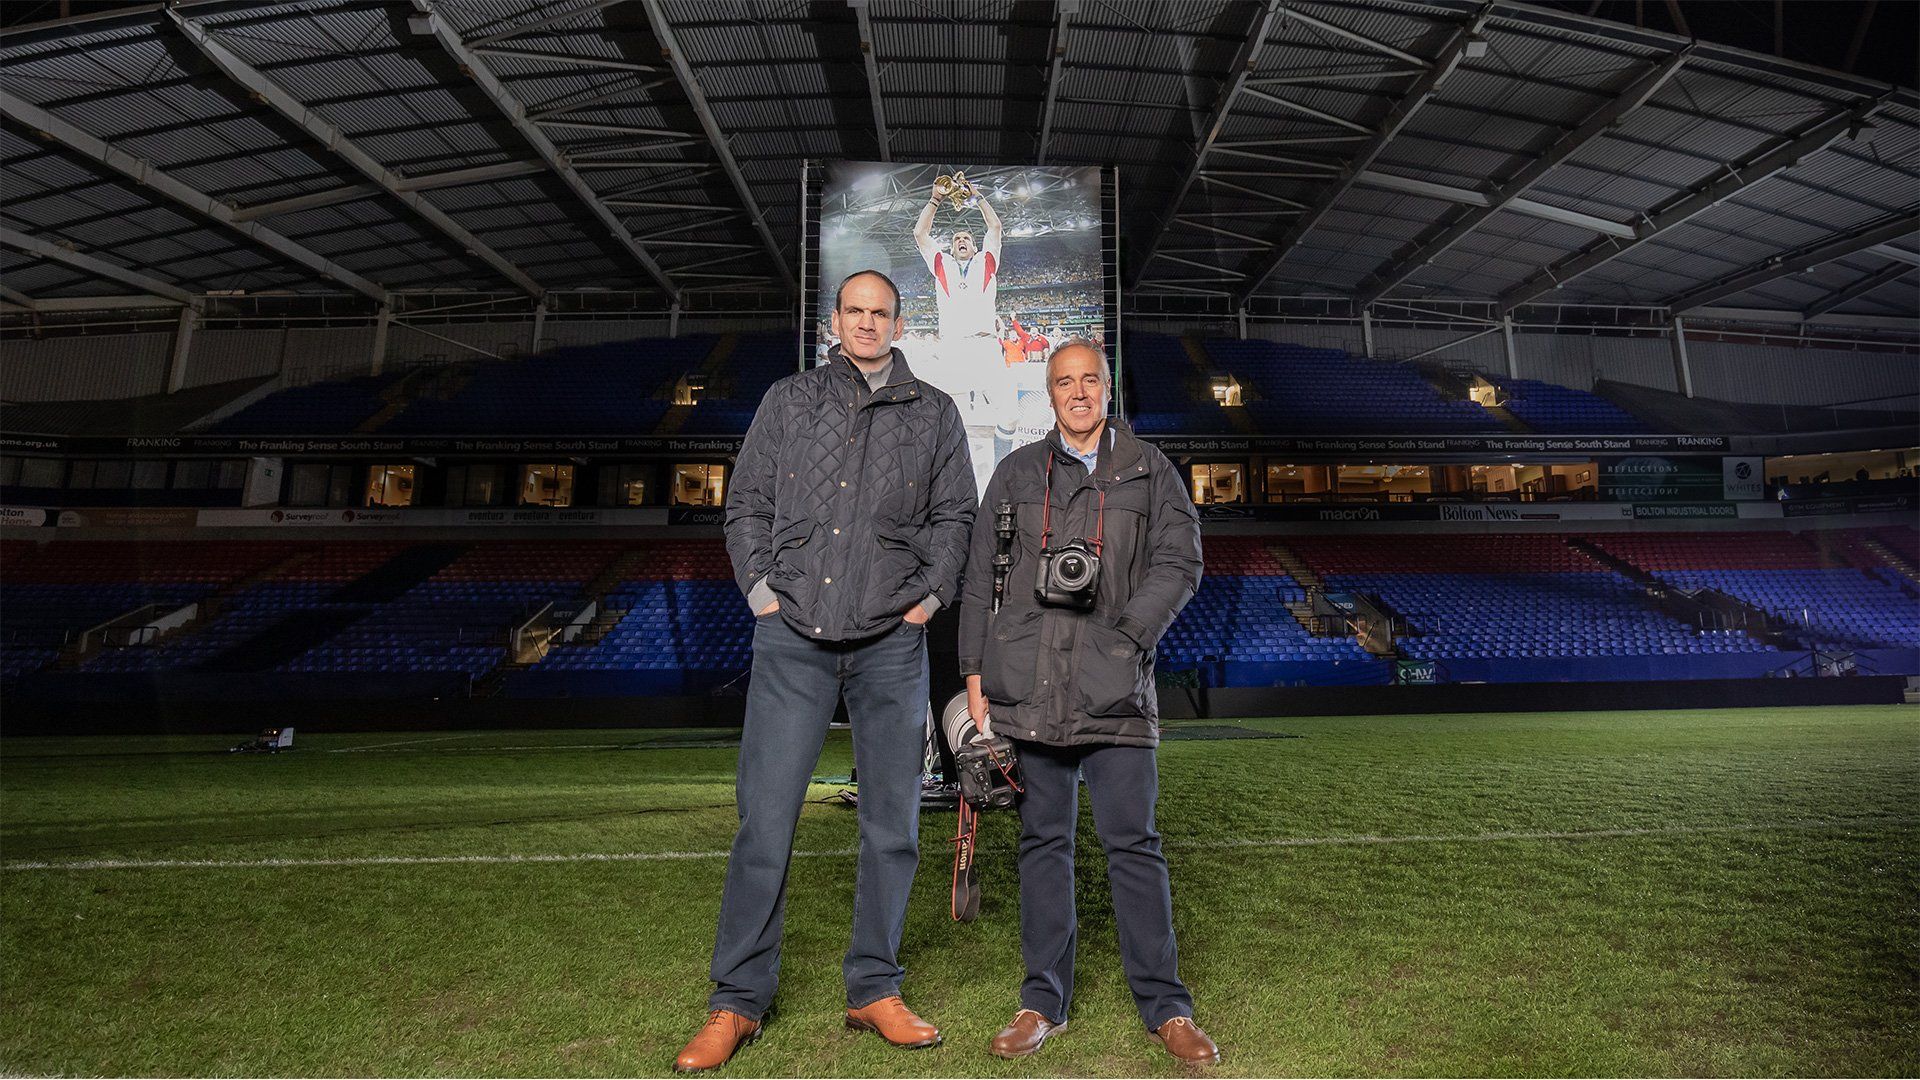 Sports photographer Dave Rogers stands next to rugby player Martin Johnson on the pitch.